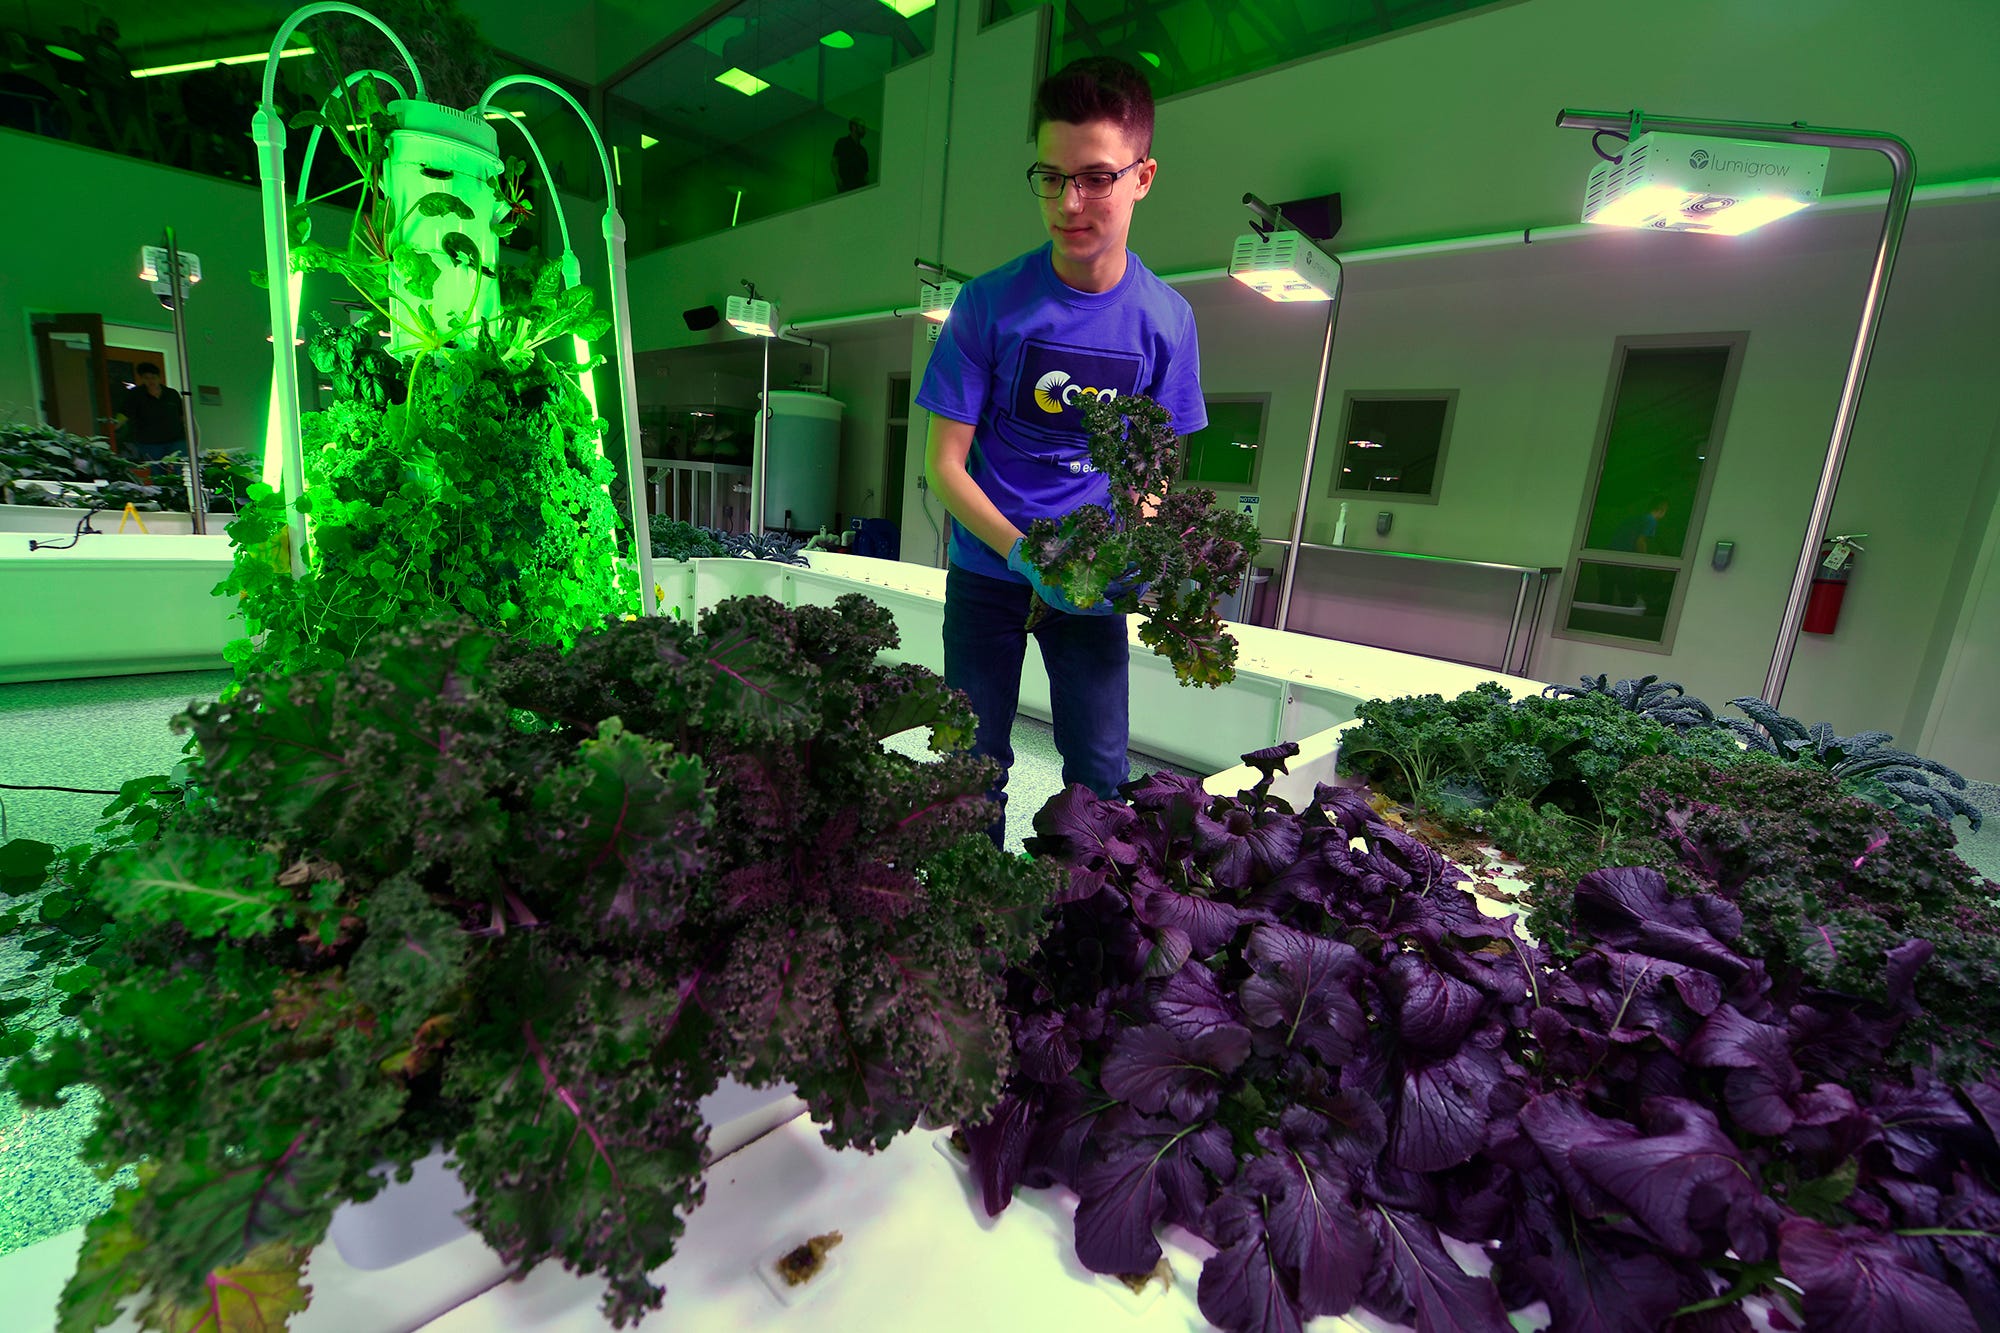 Nathaniel Saxe, a CCA junior from Springettsbury Township, harvests kale at the Agworks aquaponics facility in Harrisburg, Tuesday, January 8, 2019.  
John A. Pavoncello photo